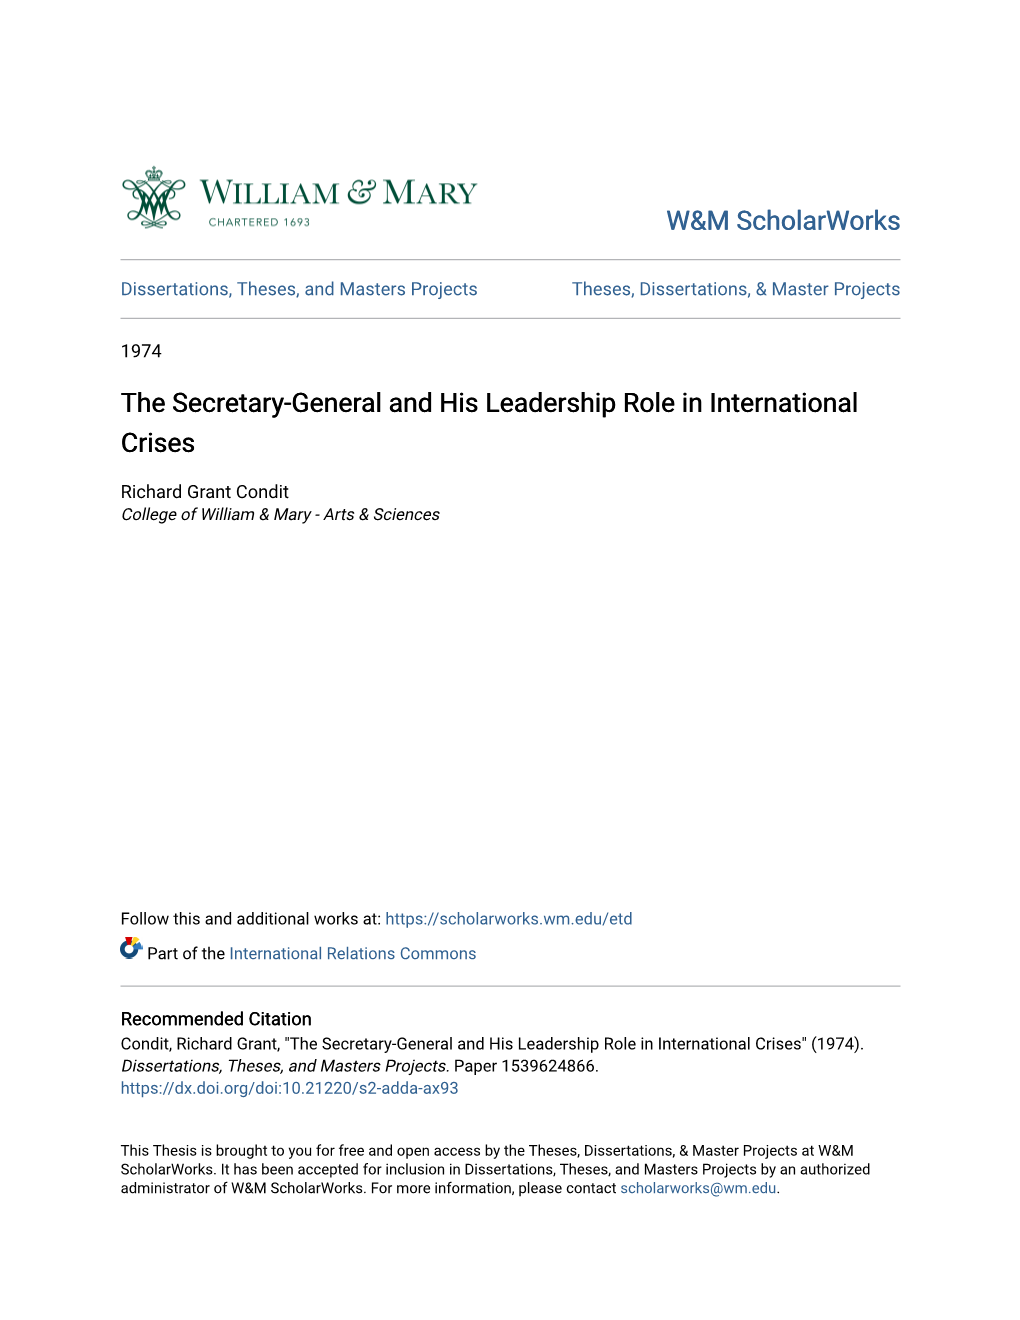 The Secretary-General and His Leadership Role in International Crises